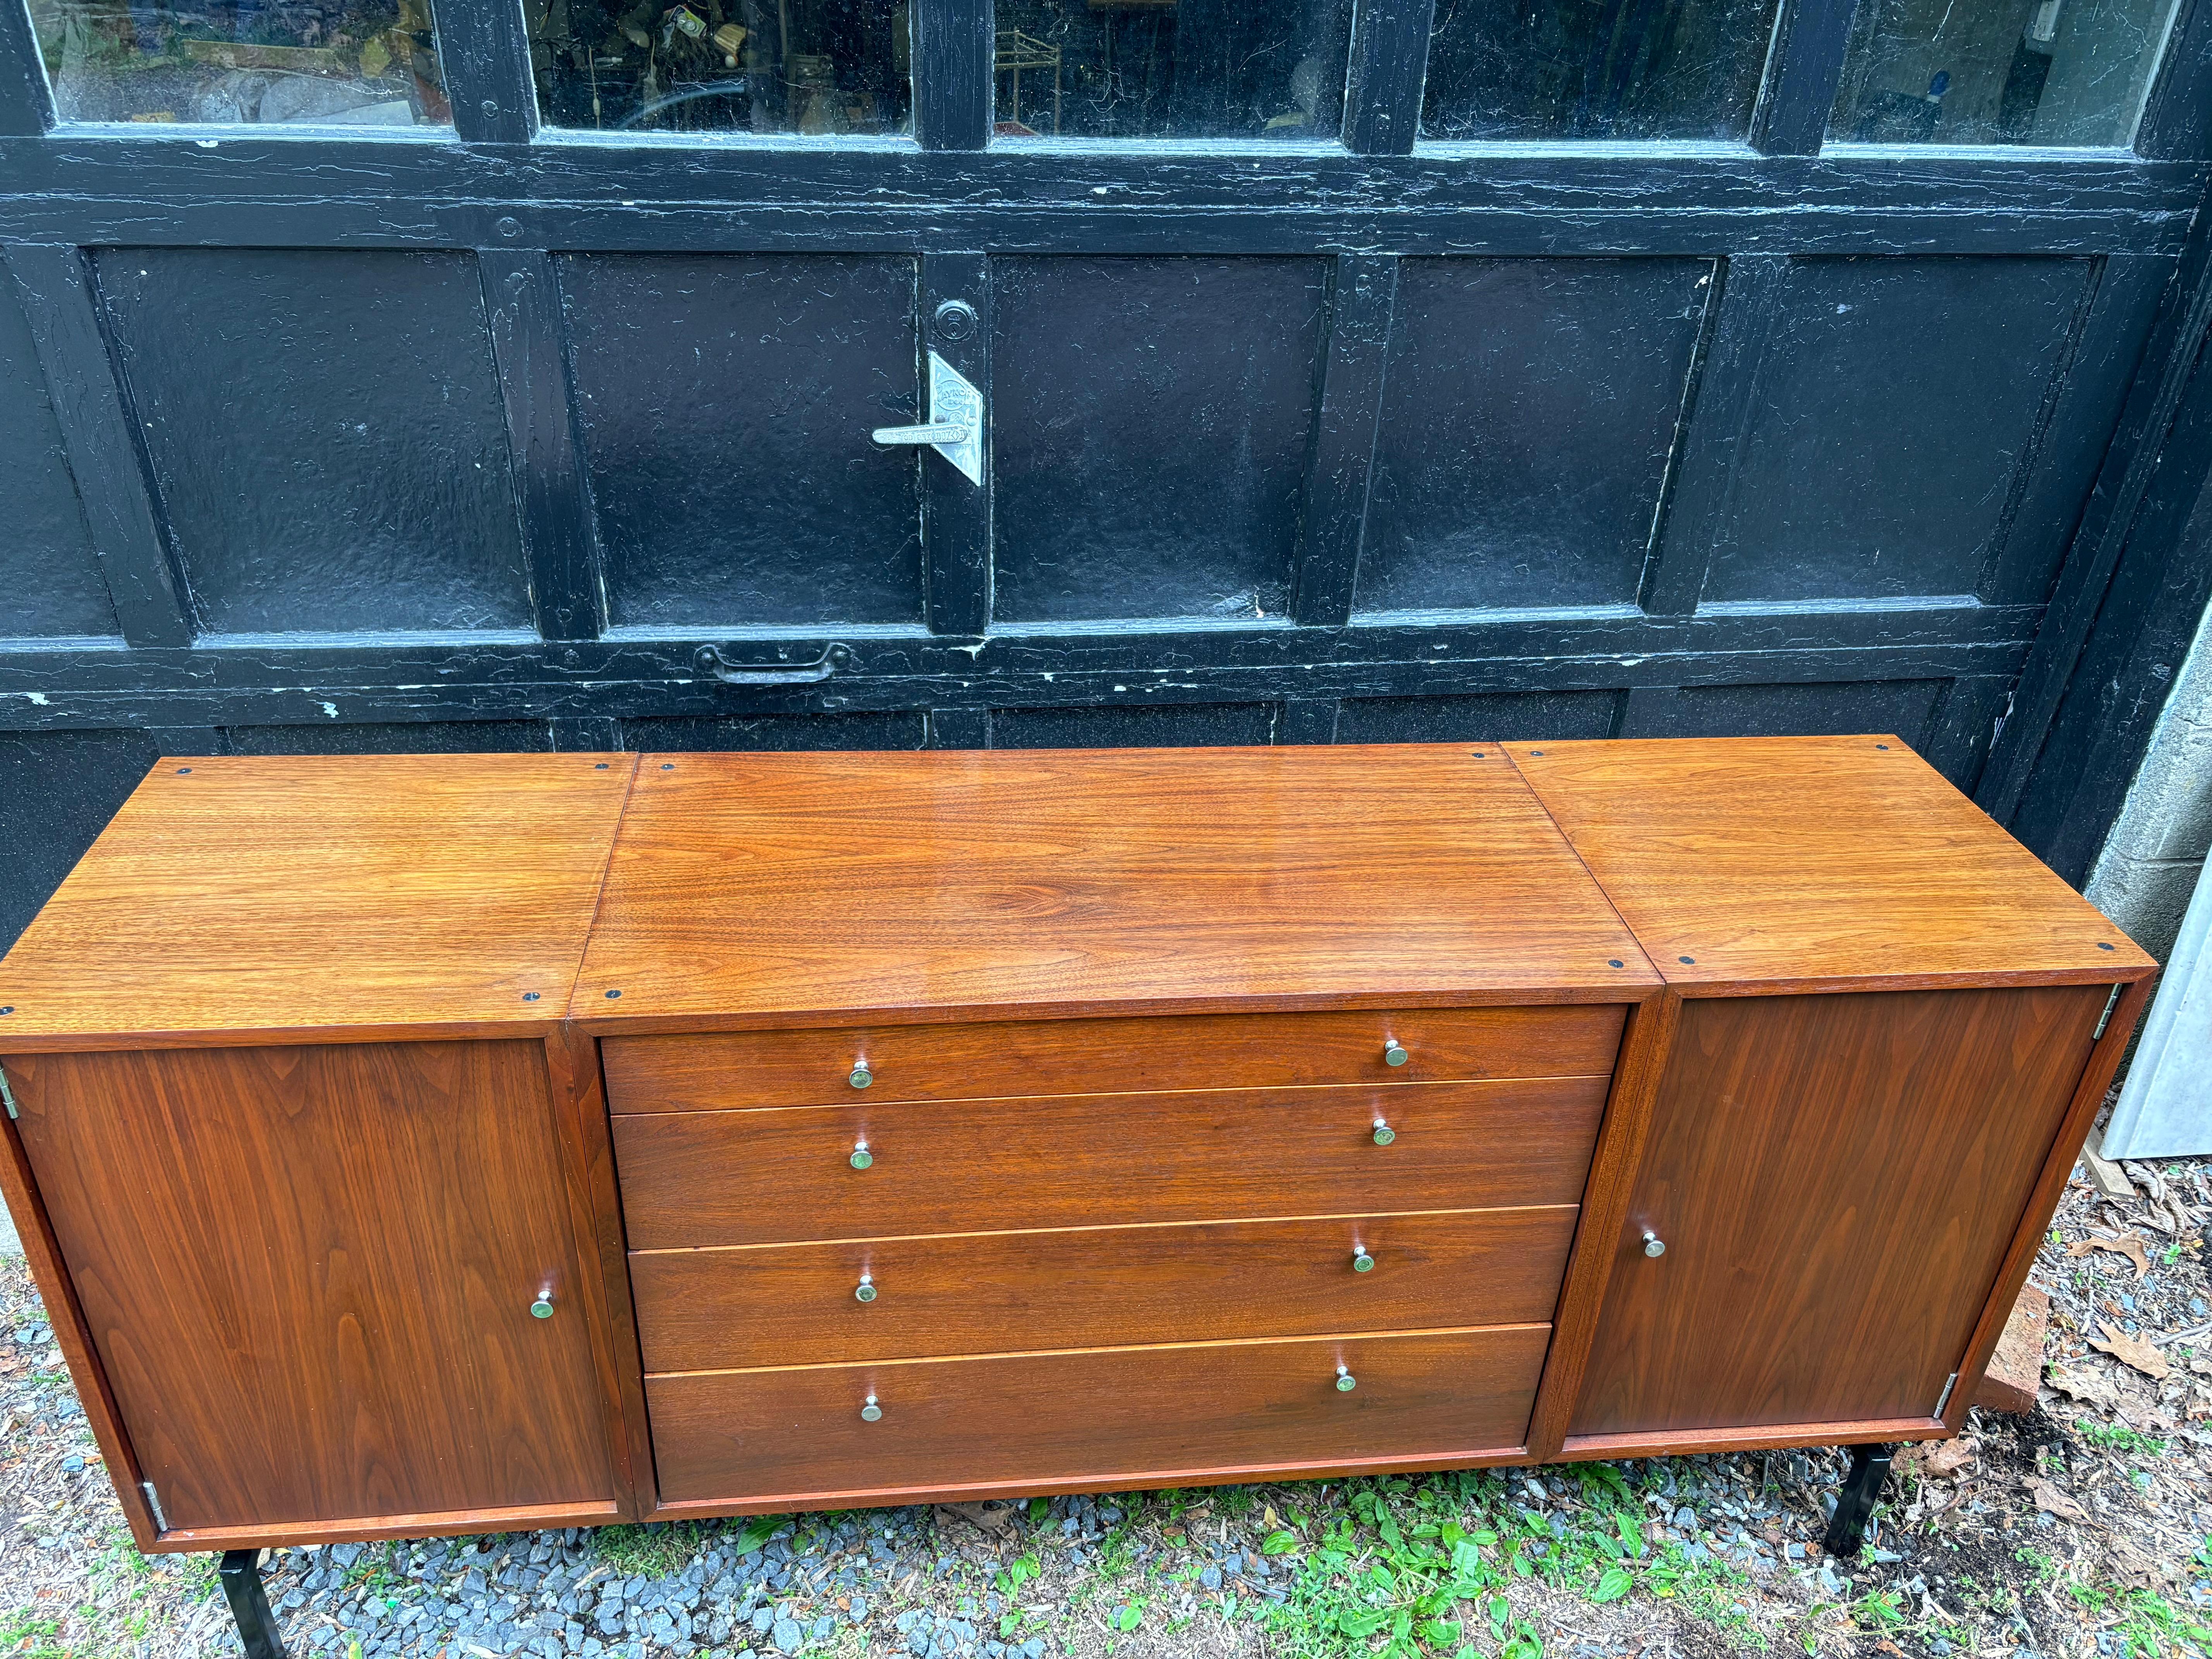 Walnut Credenza or Buffet that sits up on a square iron black base.  Two doors and 4 drawers for plenty of storage!  Unique system of connecting cabinets together to create the configuration desired.  Not sure who the maker is and have not seen